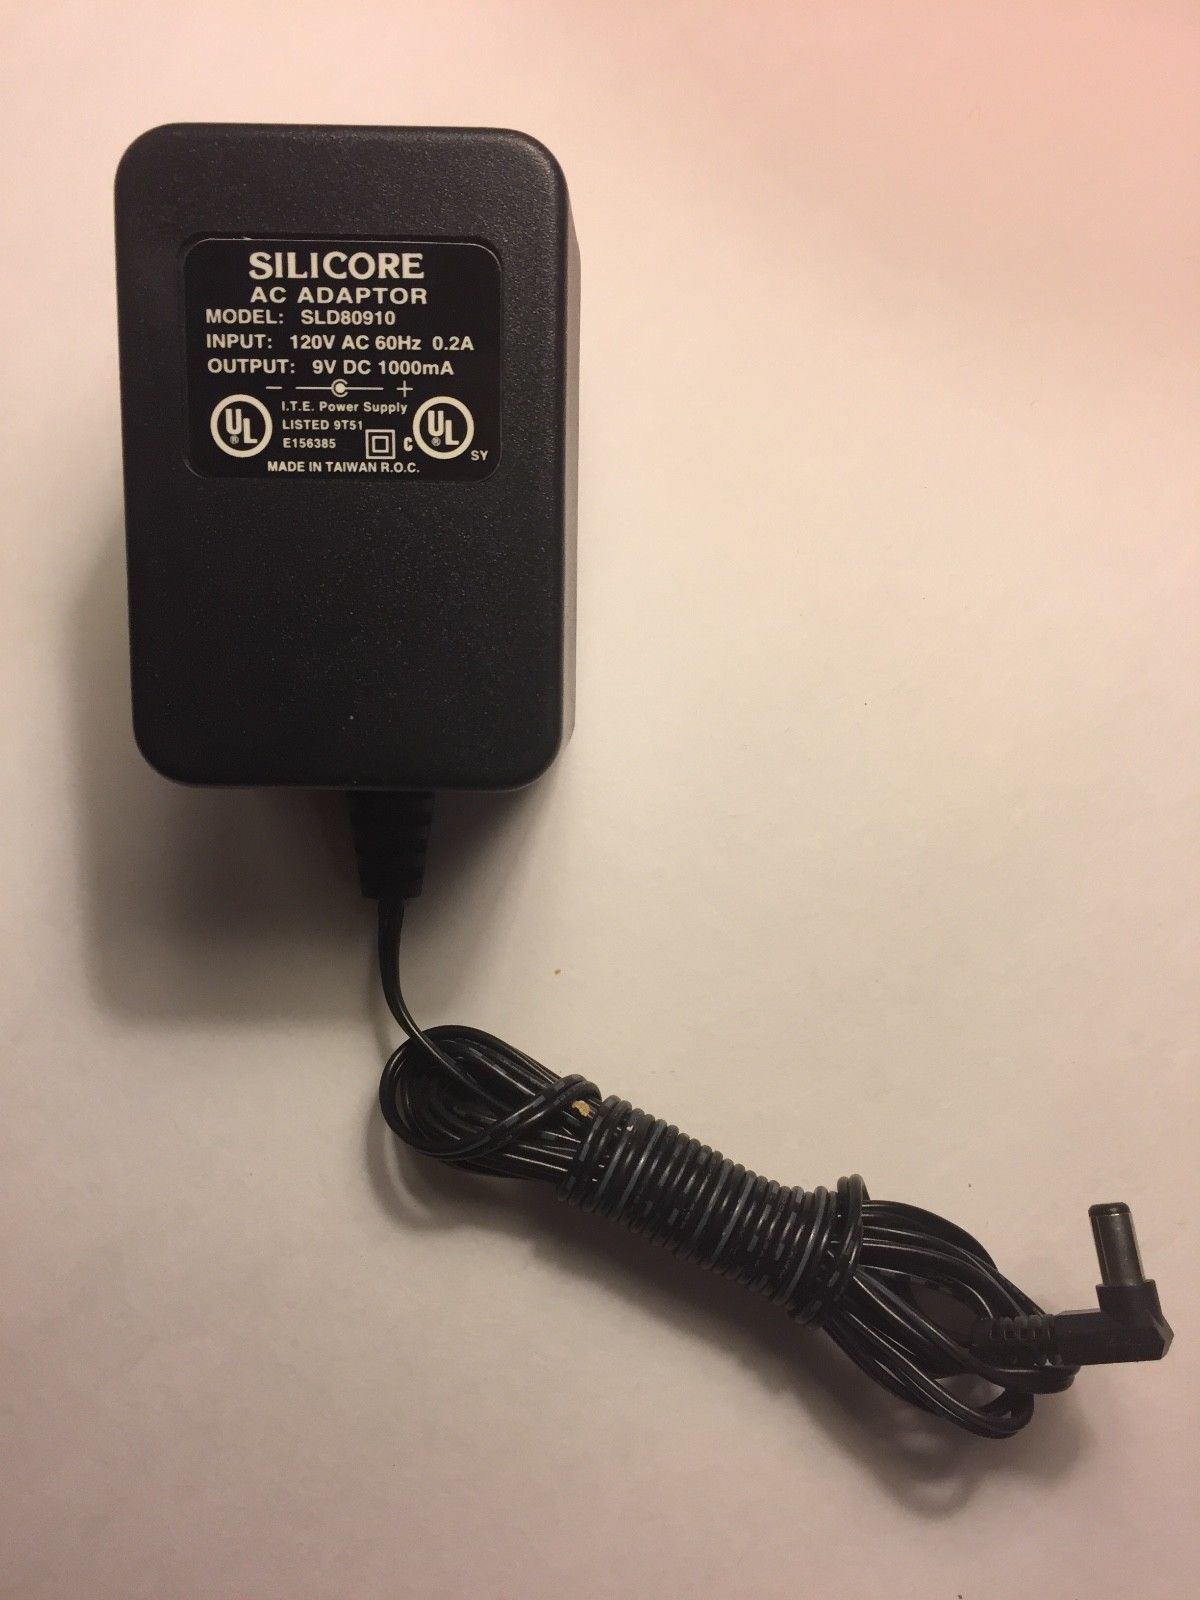 Silicore AC Adapter, Model SLD80910 Input:120VAC 60 Hz 0.2A Output: 9VDC 1A Brand: Silicore Output Voltage: 9 V Mode - Click Image to Close